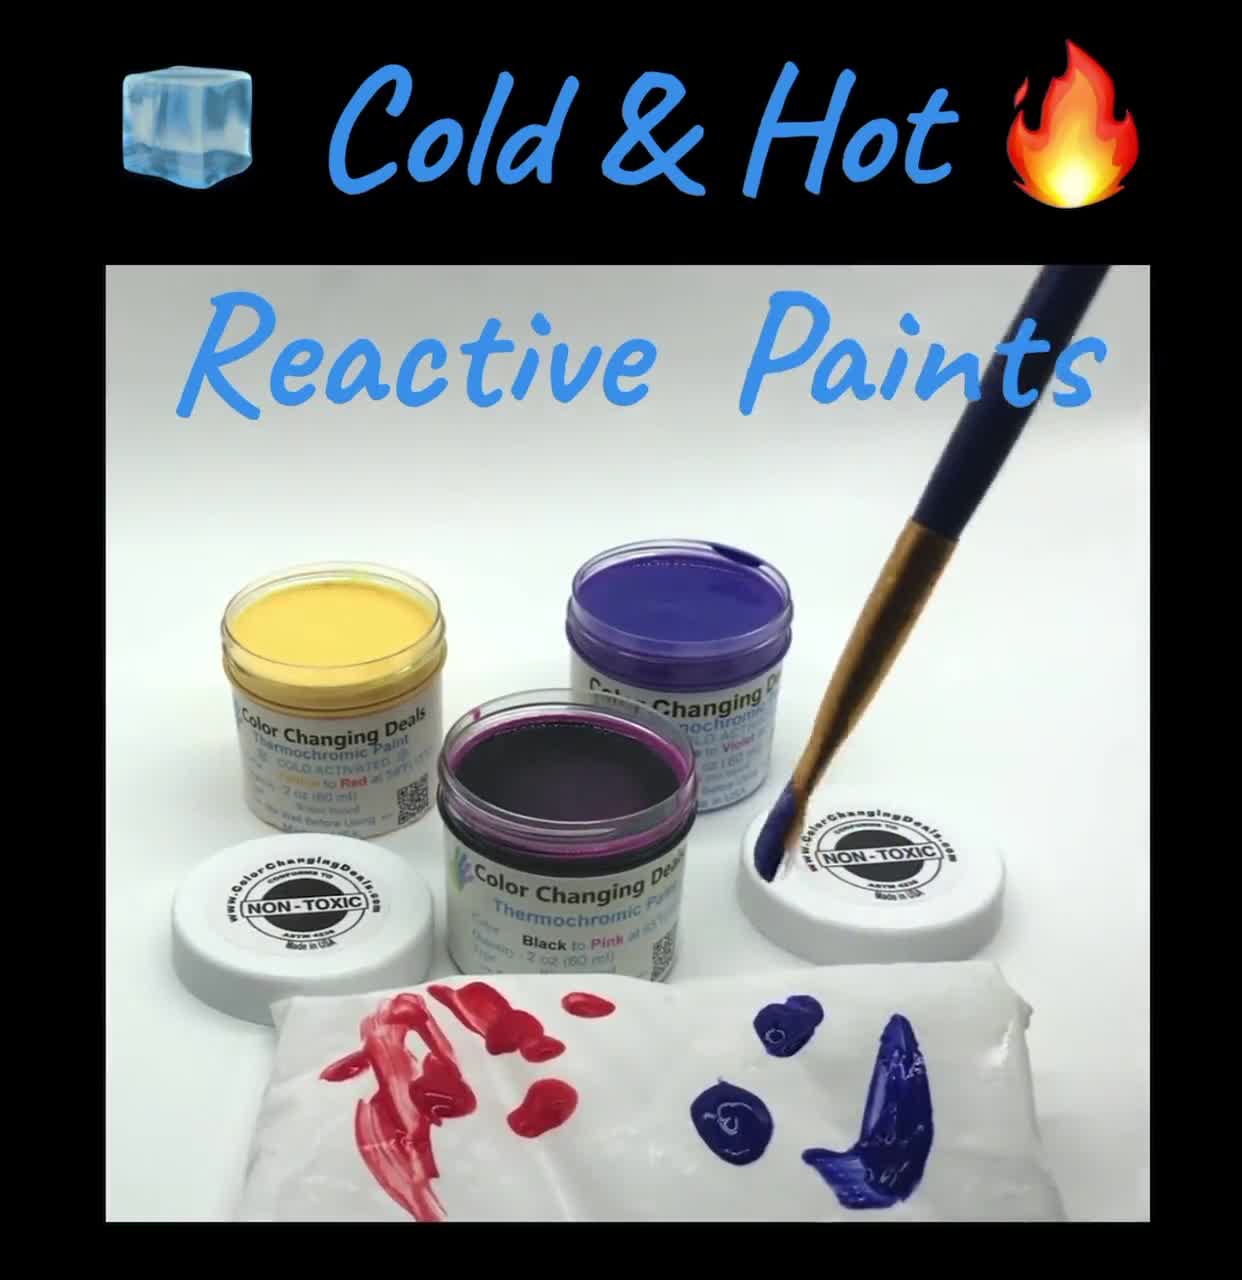 Temperature Activated Color Changing Thermochromic Paints Heat Sensitive 